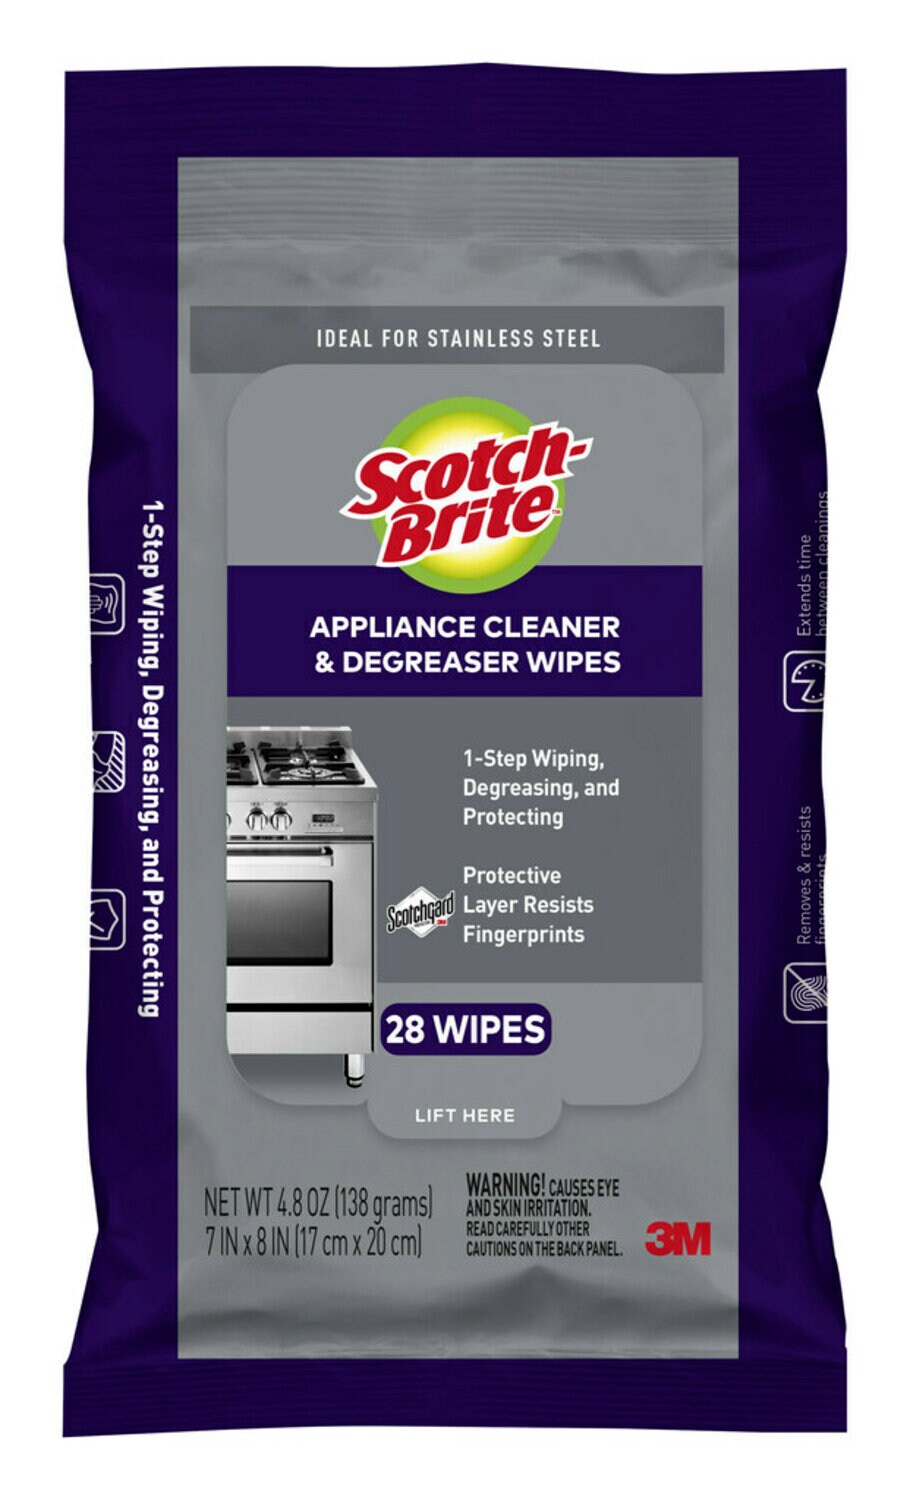 7100217266 - Scotch-Brite Appliance Cleaner & Degreaser Wipes 954-MAW-28, 6/1